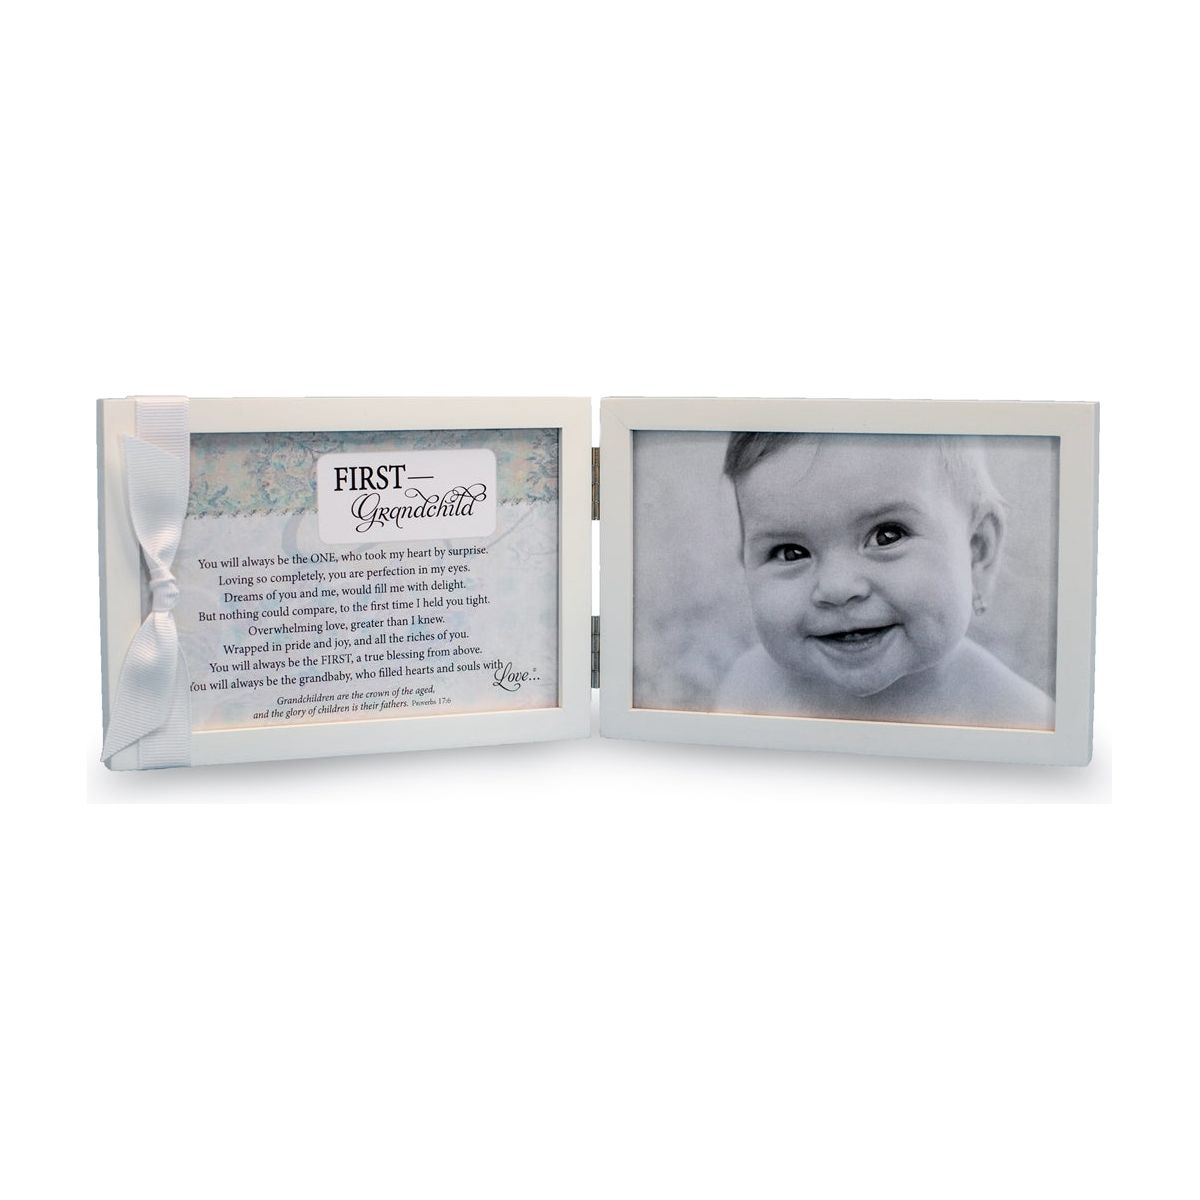 First Grandchild Photo Frame 4x6 with Scripture